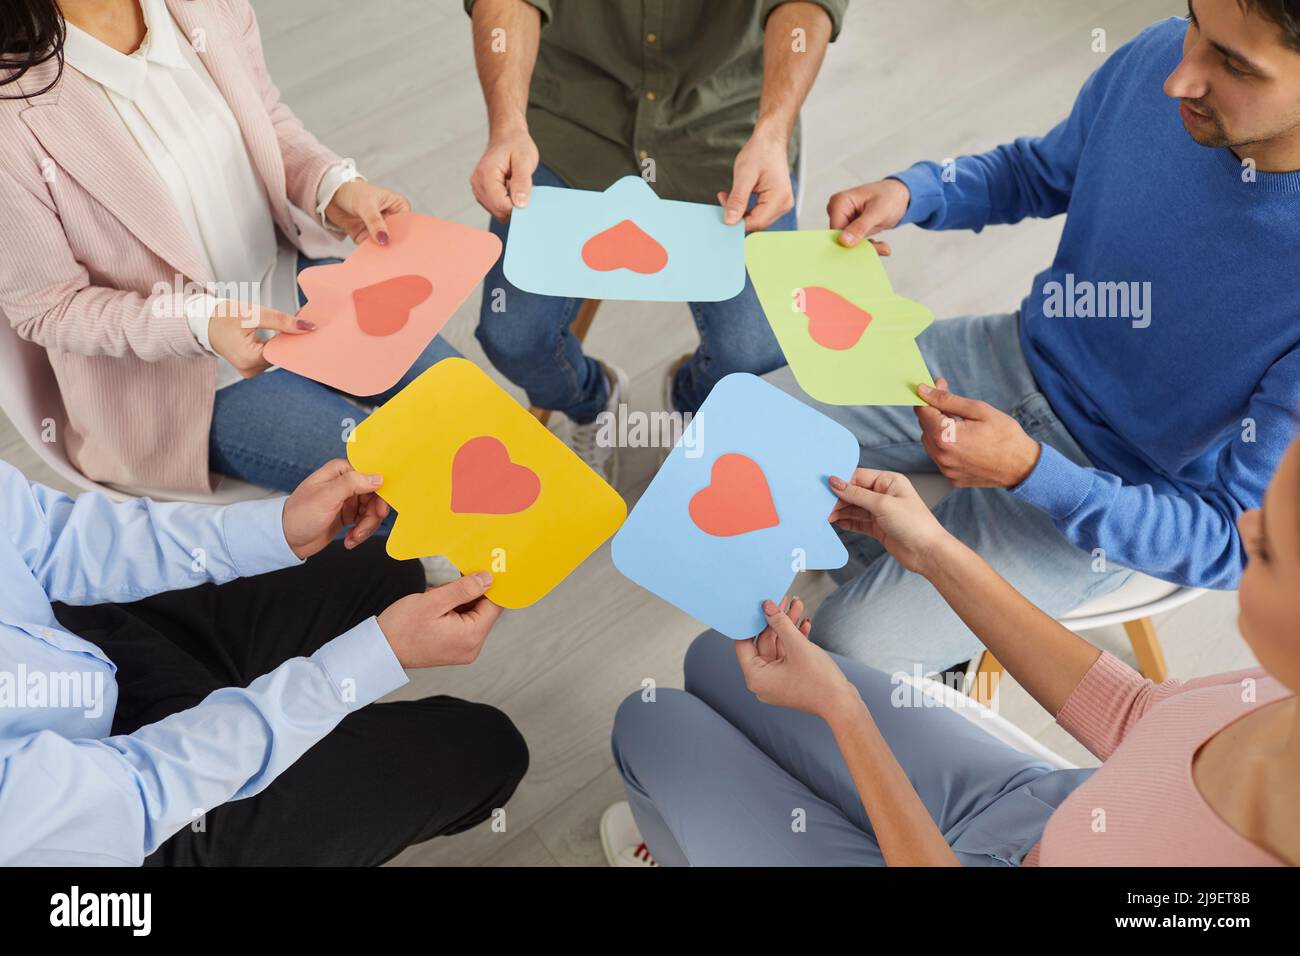 Young people sitting in circle and holding colored speech bubbles with red hearts on them. Stock Photo